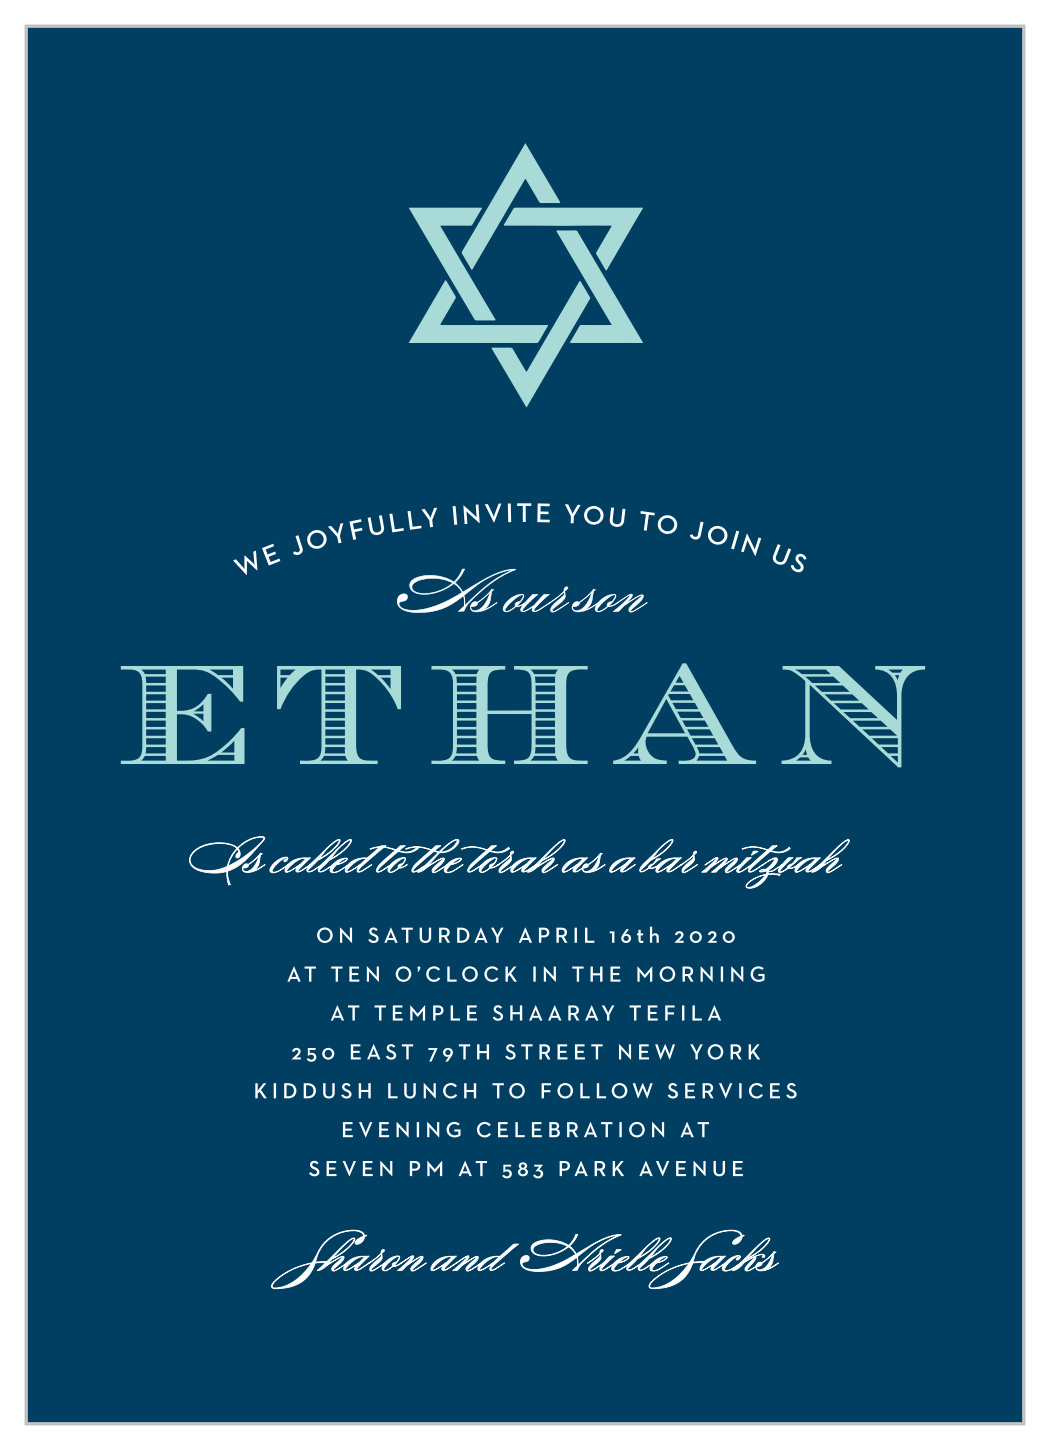 Get Better Sample Bar Mitzvah Invitations Results By Following 3 Simple Steps - alphabet emoji